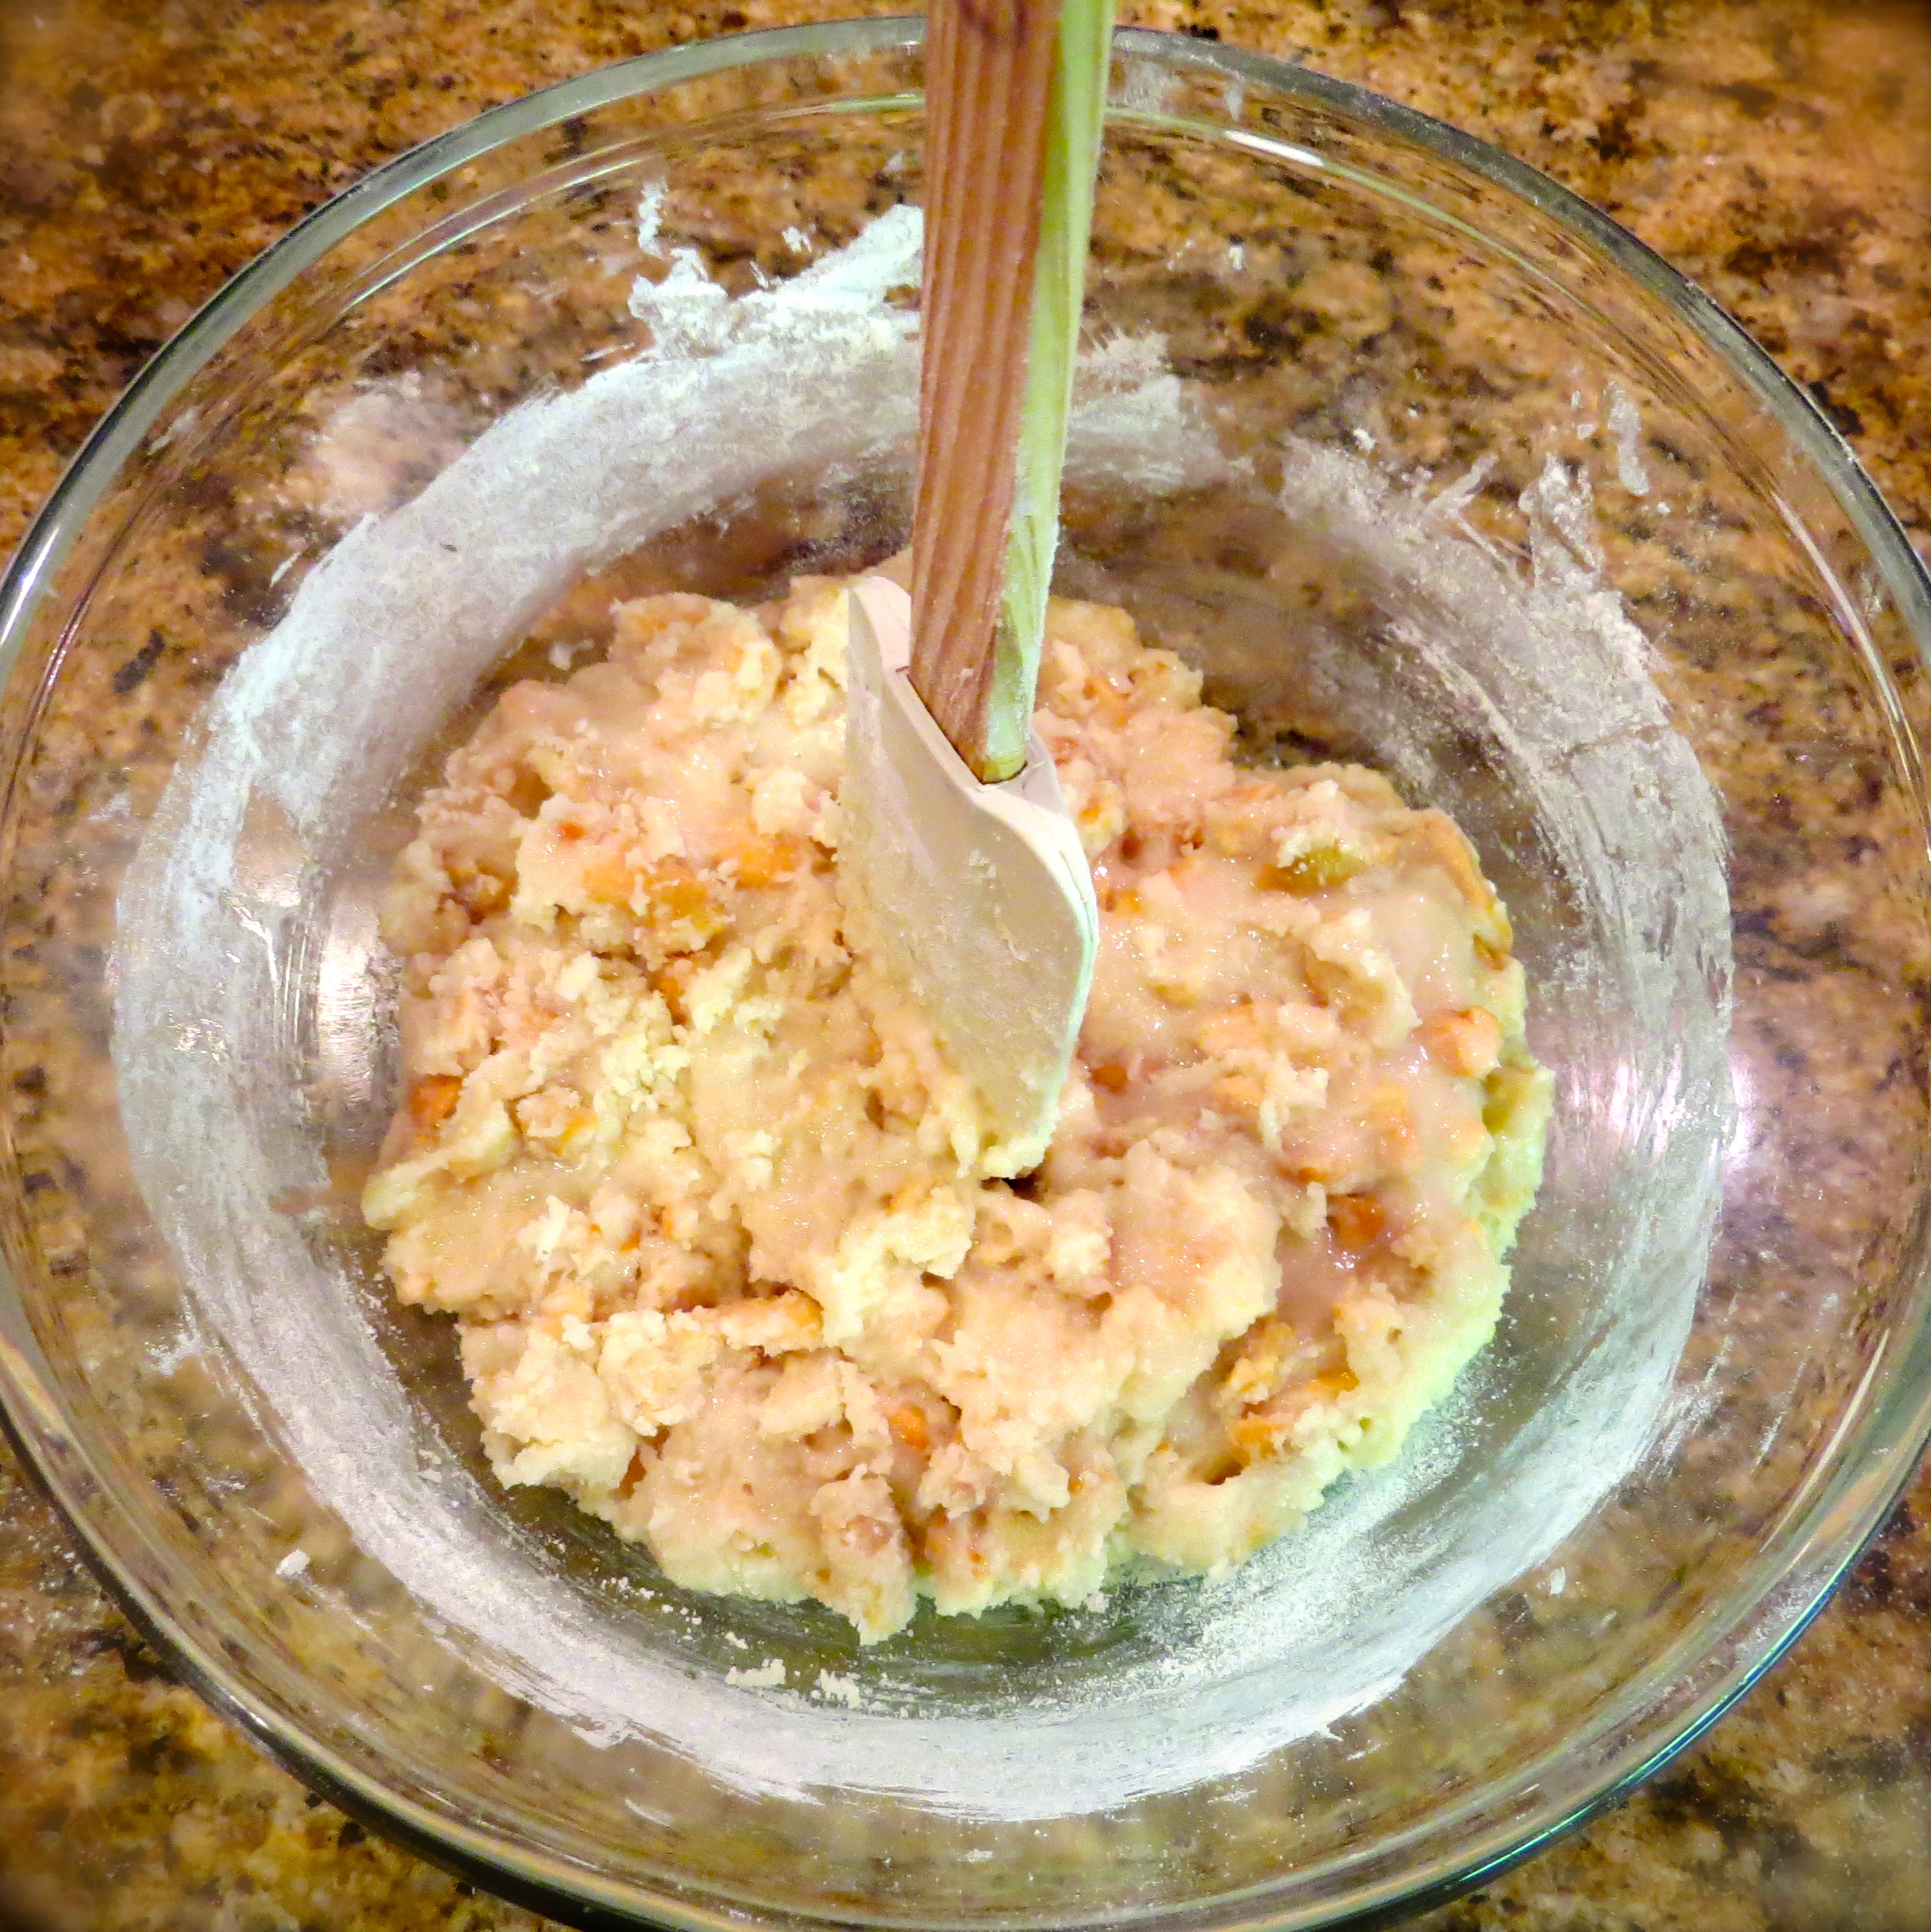 After the flour joins the party and is blended, the mixture turns thick.